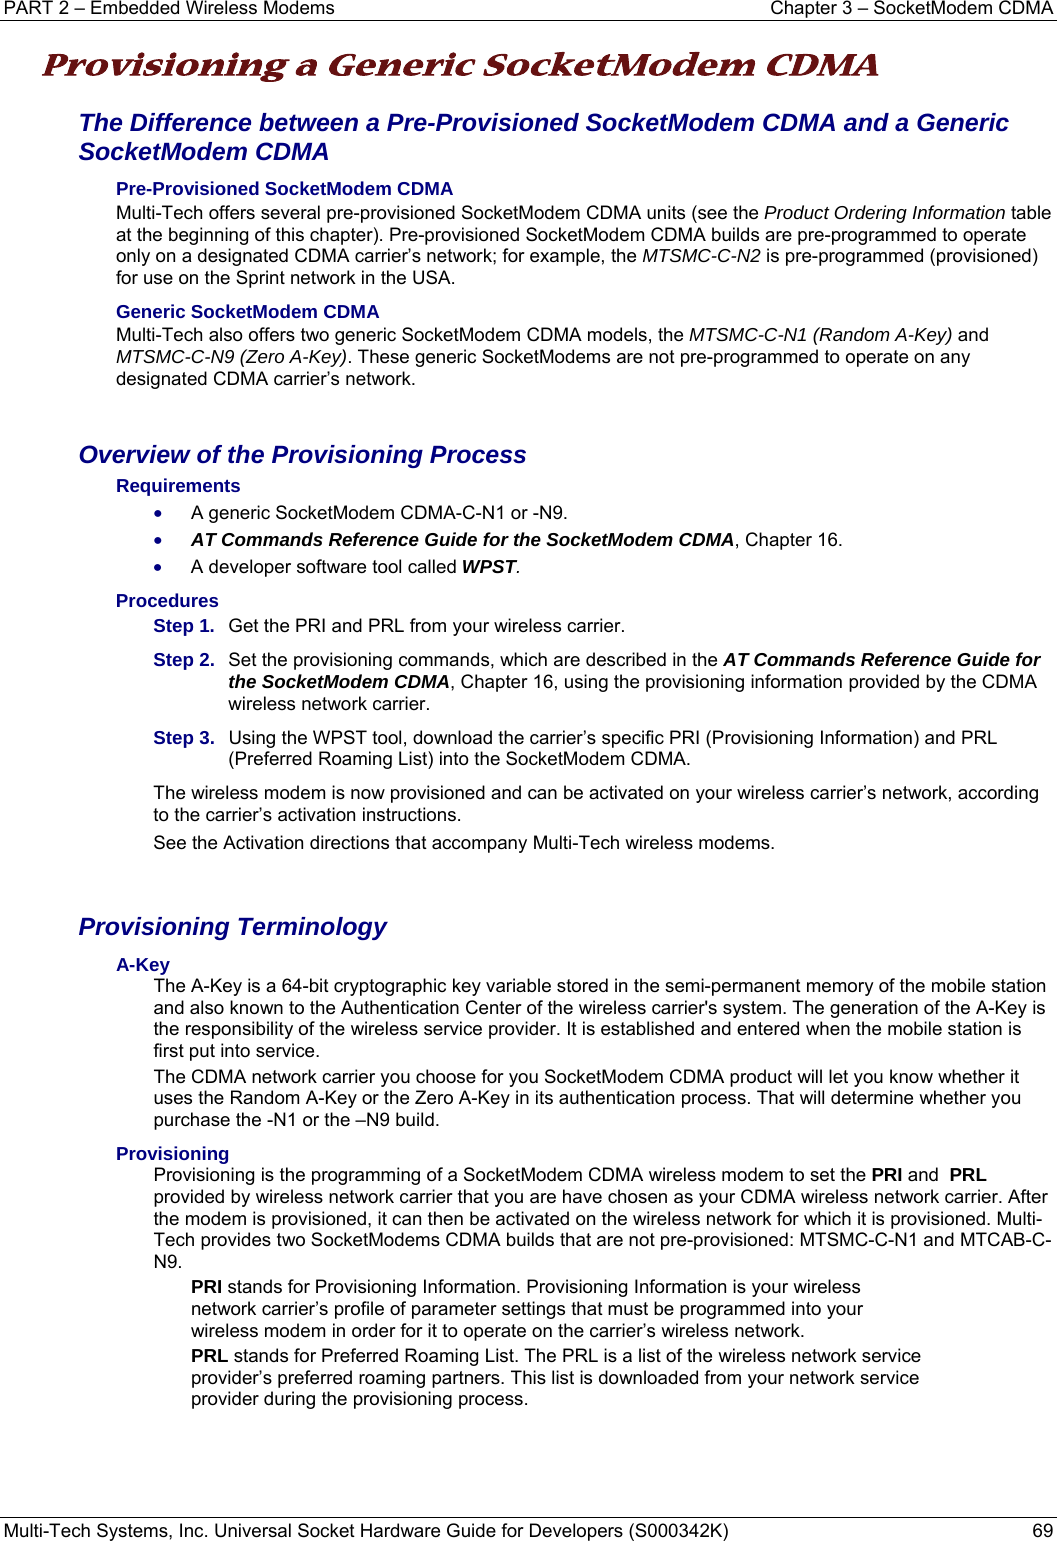 PART 2 – Embedded Wireless Modems  Chapter 3 – SocketModem CDMA  Multi-Tech Systems, Inc. Universal Socket Hardware Guide for Developers (S000342K)  69  Provisioning a Generic SocketModem CDMA  The Difference between a Pre-Provisioned SocketModem CDMA and a Generic SocketModem CDMA    Pre-Provisioned SocketModem CDMA  Multi-Tech offers several pre-provisioned SocketModem CDMA units (see the Product Ordering Information table at the beginning of this chapter). Pre-provisioned SocketModem CDMA builds are pre-programmed to operate only on a designated CDMA carrier’s network; for example, the MTSMC-C-N2 is pre-programmed (provisioned) for use on the Sprint network in the USA. Generic SocketModem CDMA  Multi-Tech also offers two generic SocketModem CDMA models, the MTSMC-C-N1 (Random A-Key) and MTSMC-C-N9 (Zero A-Key). These generic SocketModems are not pre-programmed to operate on any designated CDMA carrier’s network.   Overview of the Provisioning Process Requirements • A generic SocketModem CDMA-C-N1 or -N9. • AT Commands Reference Guide for the SocketModem CDMA, Chapter 16. • A developer software tool called WPST.  Procedures Step 1.  Get the PRI and PRL from your wireless carrier. Step 2.  Set the provisioning commands, which are described in the AT Commands Reference Guide for the SocketModem CDMA, Chapter 16, using the provisioning information provided by the CDMA wireless network carrier.    Step 3.   Using the WPST tool, download the carrier’s specific PRI (Provisioning Information) and PRL (Preferred Roaming List) into the SocketModem CDMA. The wireless modem is now provisioned and can be activated on your wireless carrier’s network, according to the carrier’s activation instructions.  See the Activation directions that accompany Multi-Tech wireless modems.    Provisioning Terminology A-Key The A-Key is a 64-bit cryptographic key variable stored in the semi-permanent memory of the mobile station and also known to the Authentication Center of the wireless carrier&apos;s system. The generation of the A-Key is the responsibility of the wireless service provider. It is established and entered when the mobile station is first put into service.  The CDMA network carrier you choose for you SocketModem CDMA product will let you know whether it uses the Random A-Key or the Zero A-Key in its authentication process. That will determine whether you purchase the -N1 or the –N9 build.    Provisioning Provisioning is the programming of a SocketModem CDMA wireless modem to set the PRI and  PRL provided by wireless network carrier that you are have chosen as your CDMA wireless network carrier. After the modem is provisioned, it can then be activated on the wireless network for which it is provisioned. Multi-Tech provides two SocketModems CDMA builds that are not pre-provisioned: MTSMC-C-N1 and MTCAB-C-N9. PRI stands for Provisioning Information. Provisioning Information is your wireless network carrier’s profile of parameter settings that must be programmed into your wireless modem in order for it to operate on the carrier’s wireless network.     PRL stands for Preferred Roaming List. The PRL is a list of the wireless network service provider’s preferred roaming partners. This list is downloaded from your network service provider during the provisioning process.     